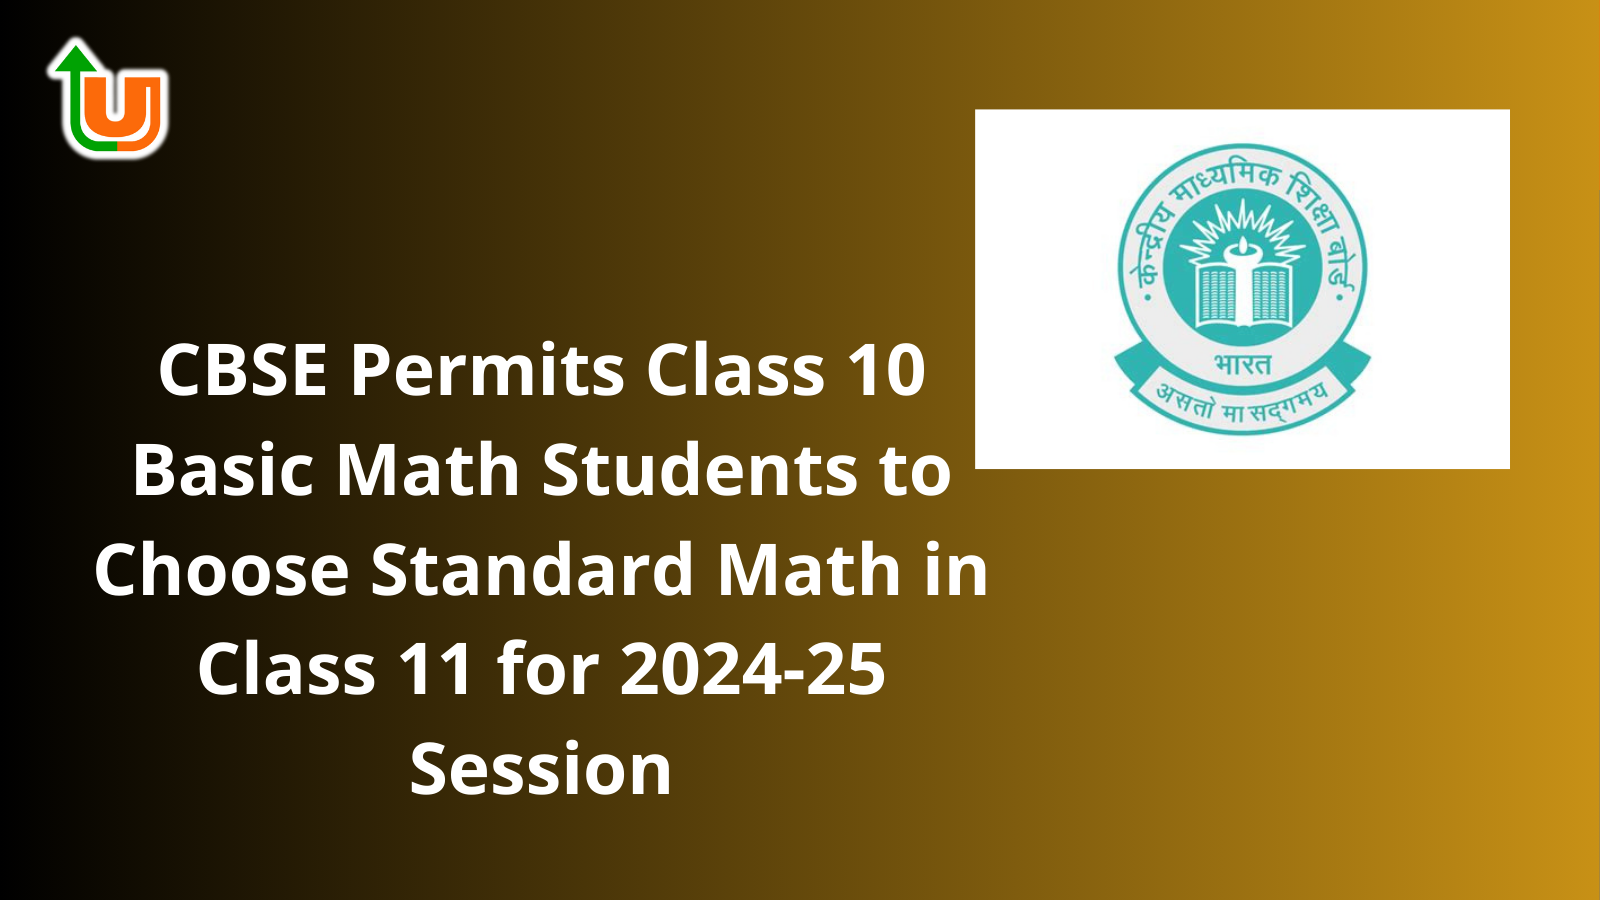 CBSE Permits Class 10 Basic Math Students to Choose Standard Math in Class 11 for 2024-25 Session